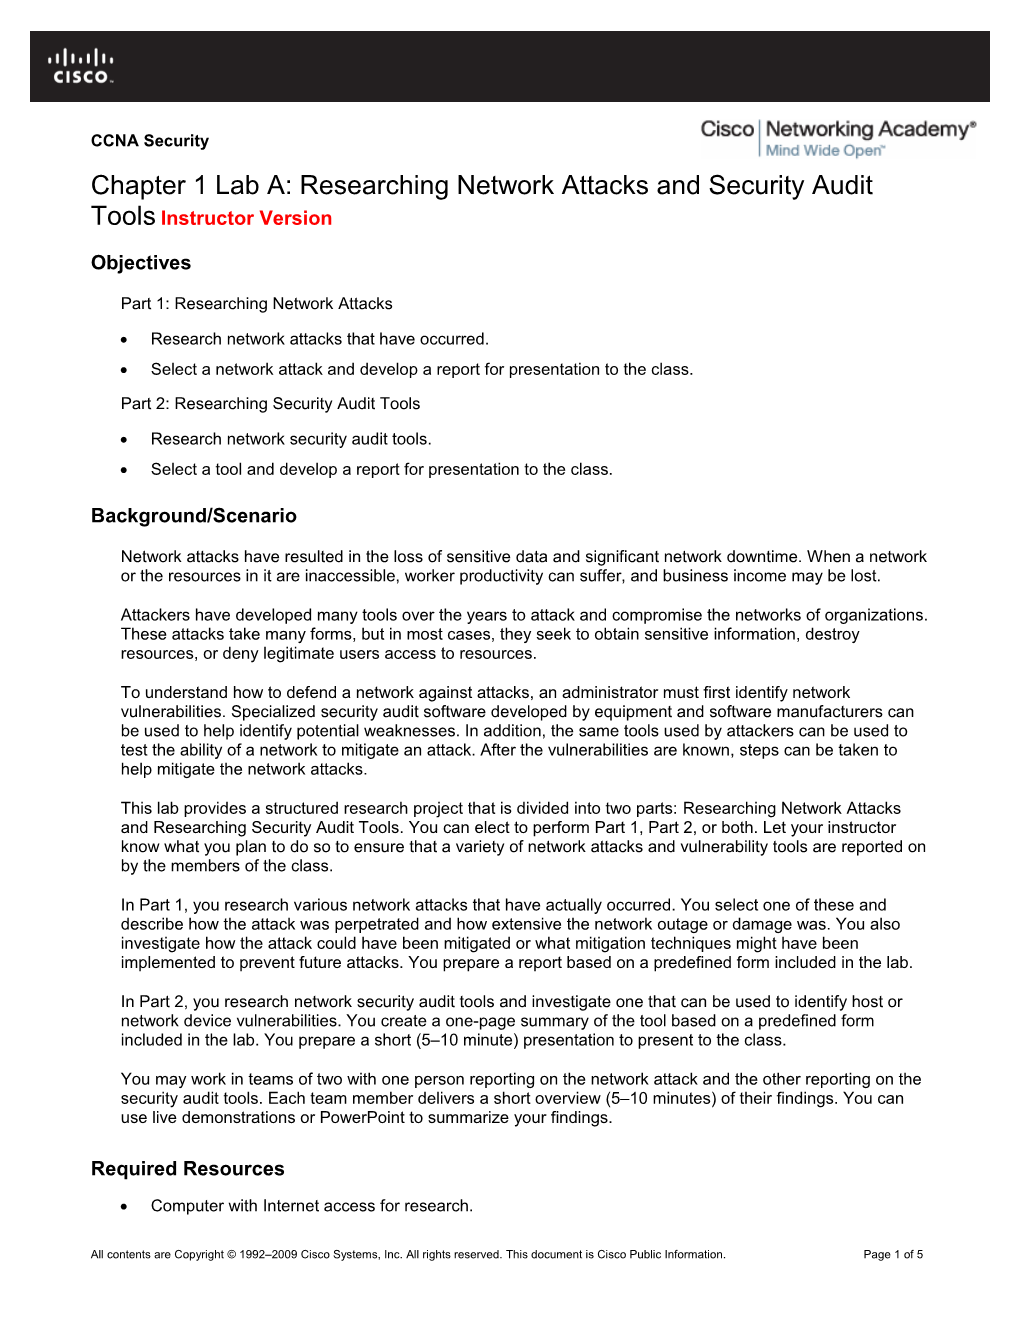 Researching Network Attacks and Security Audit Tools